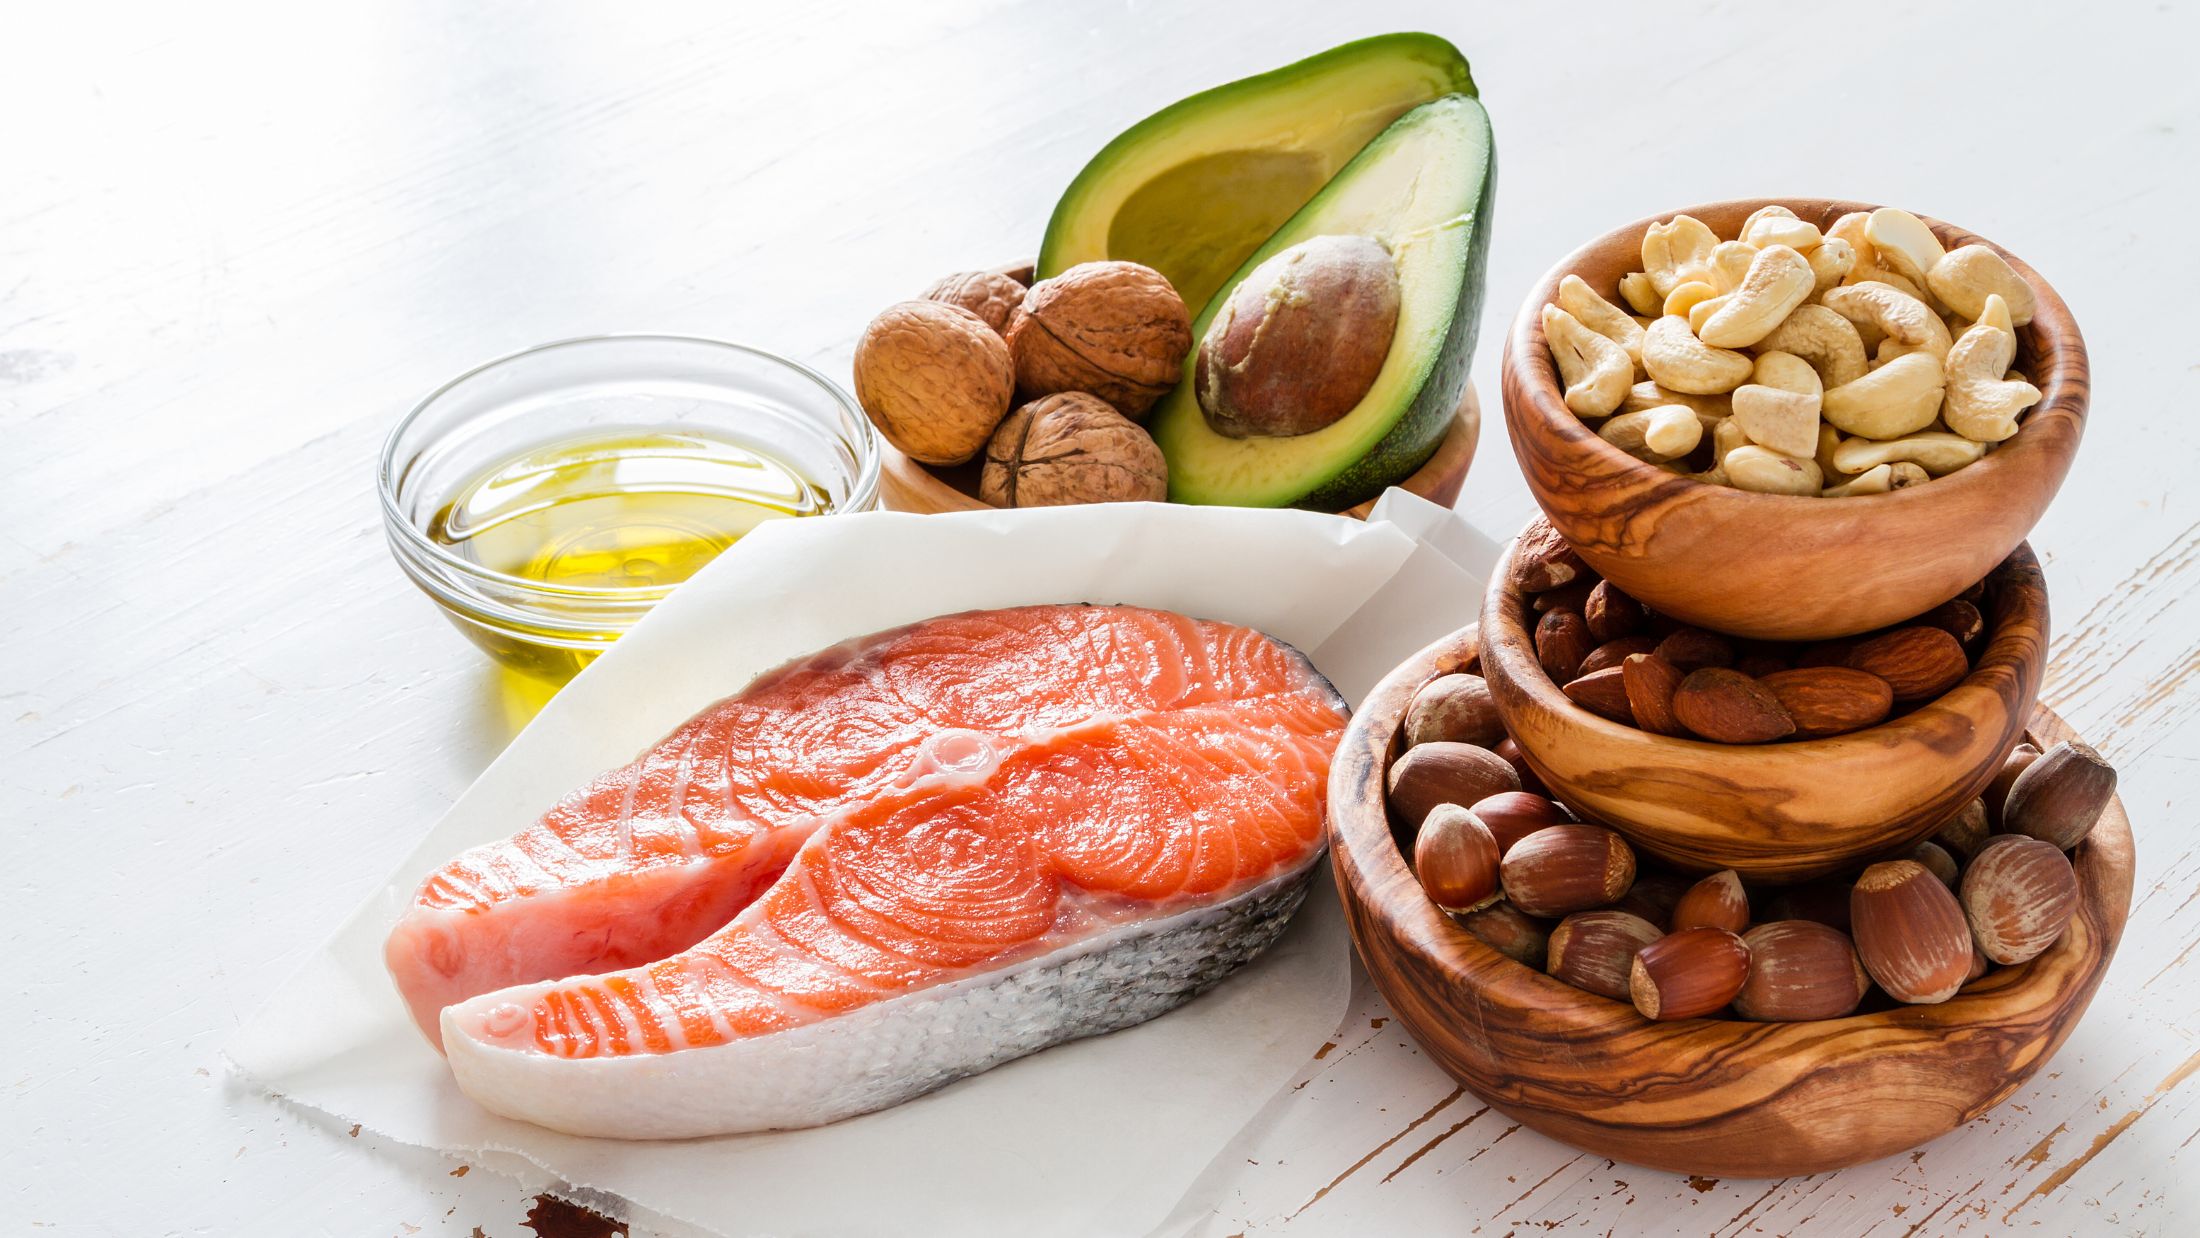 How to choose healthy fats for better health